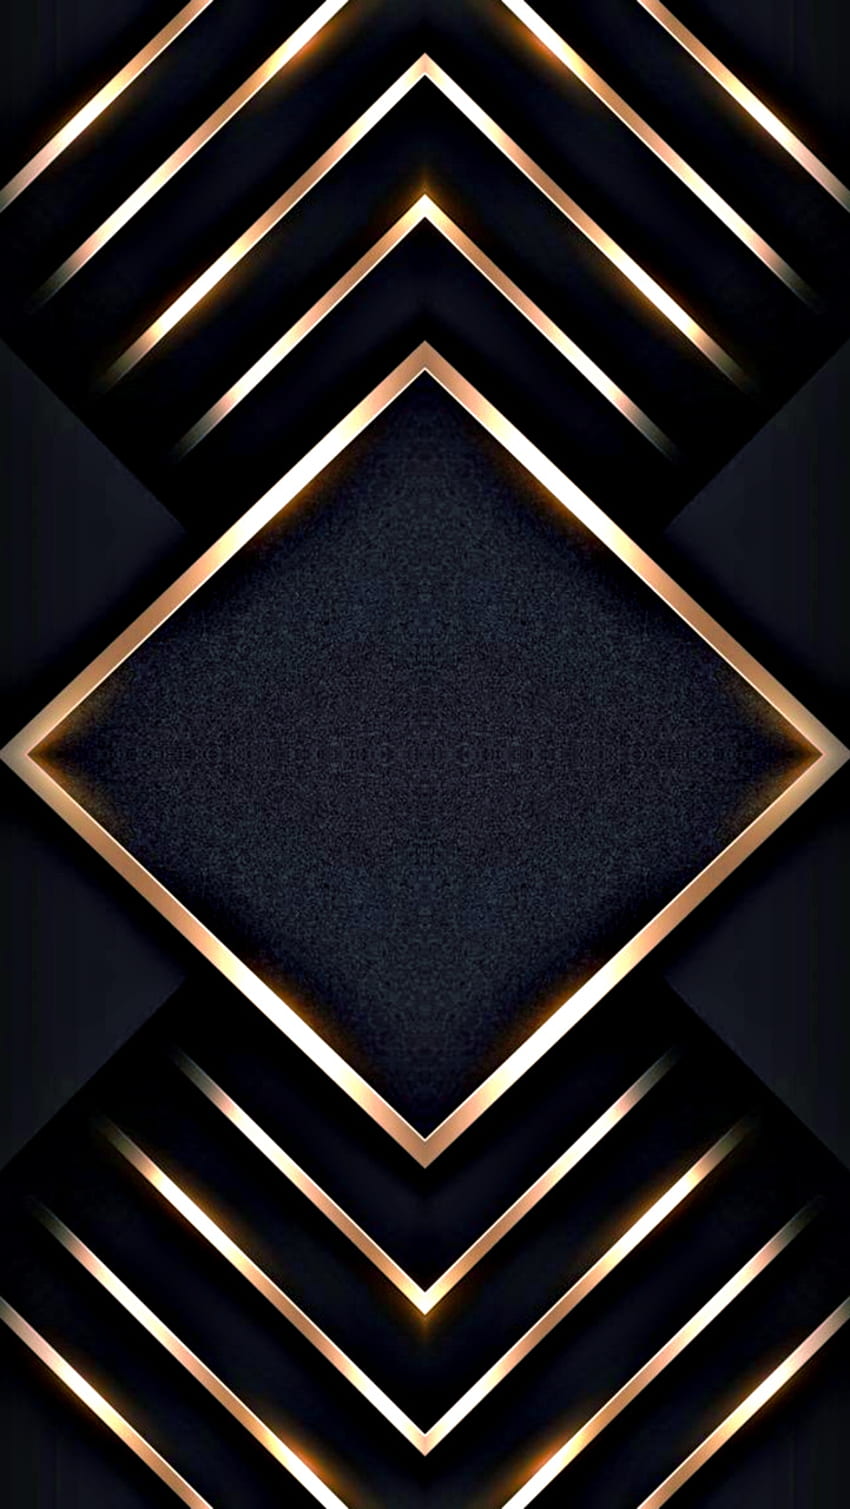 ffkkhg, shadow, android, pattern, gold, stripes, 3d, samsung, material property, modern, tints and shades, flat, design, dark, galaxy, lines, new, texture, black, abstract, iphone, plus, diamond, material, mate, , lg HD phone wallpaper